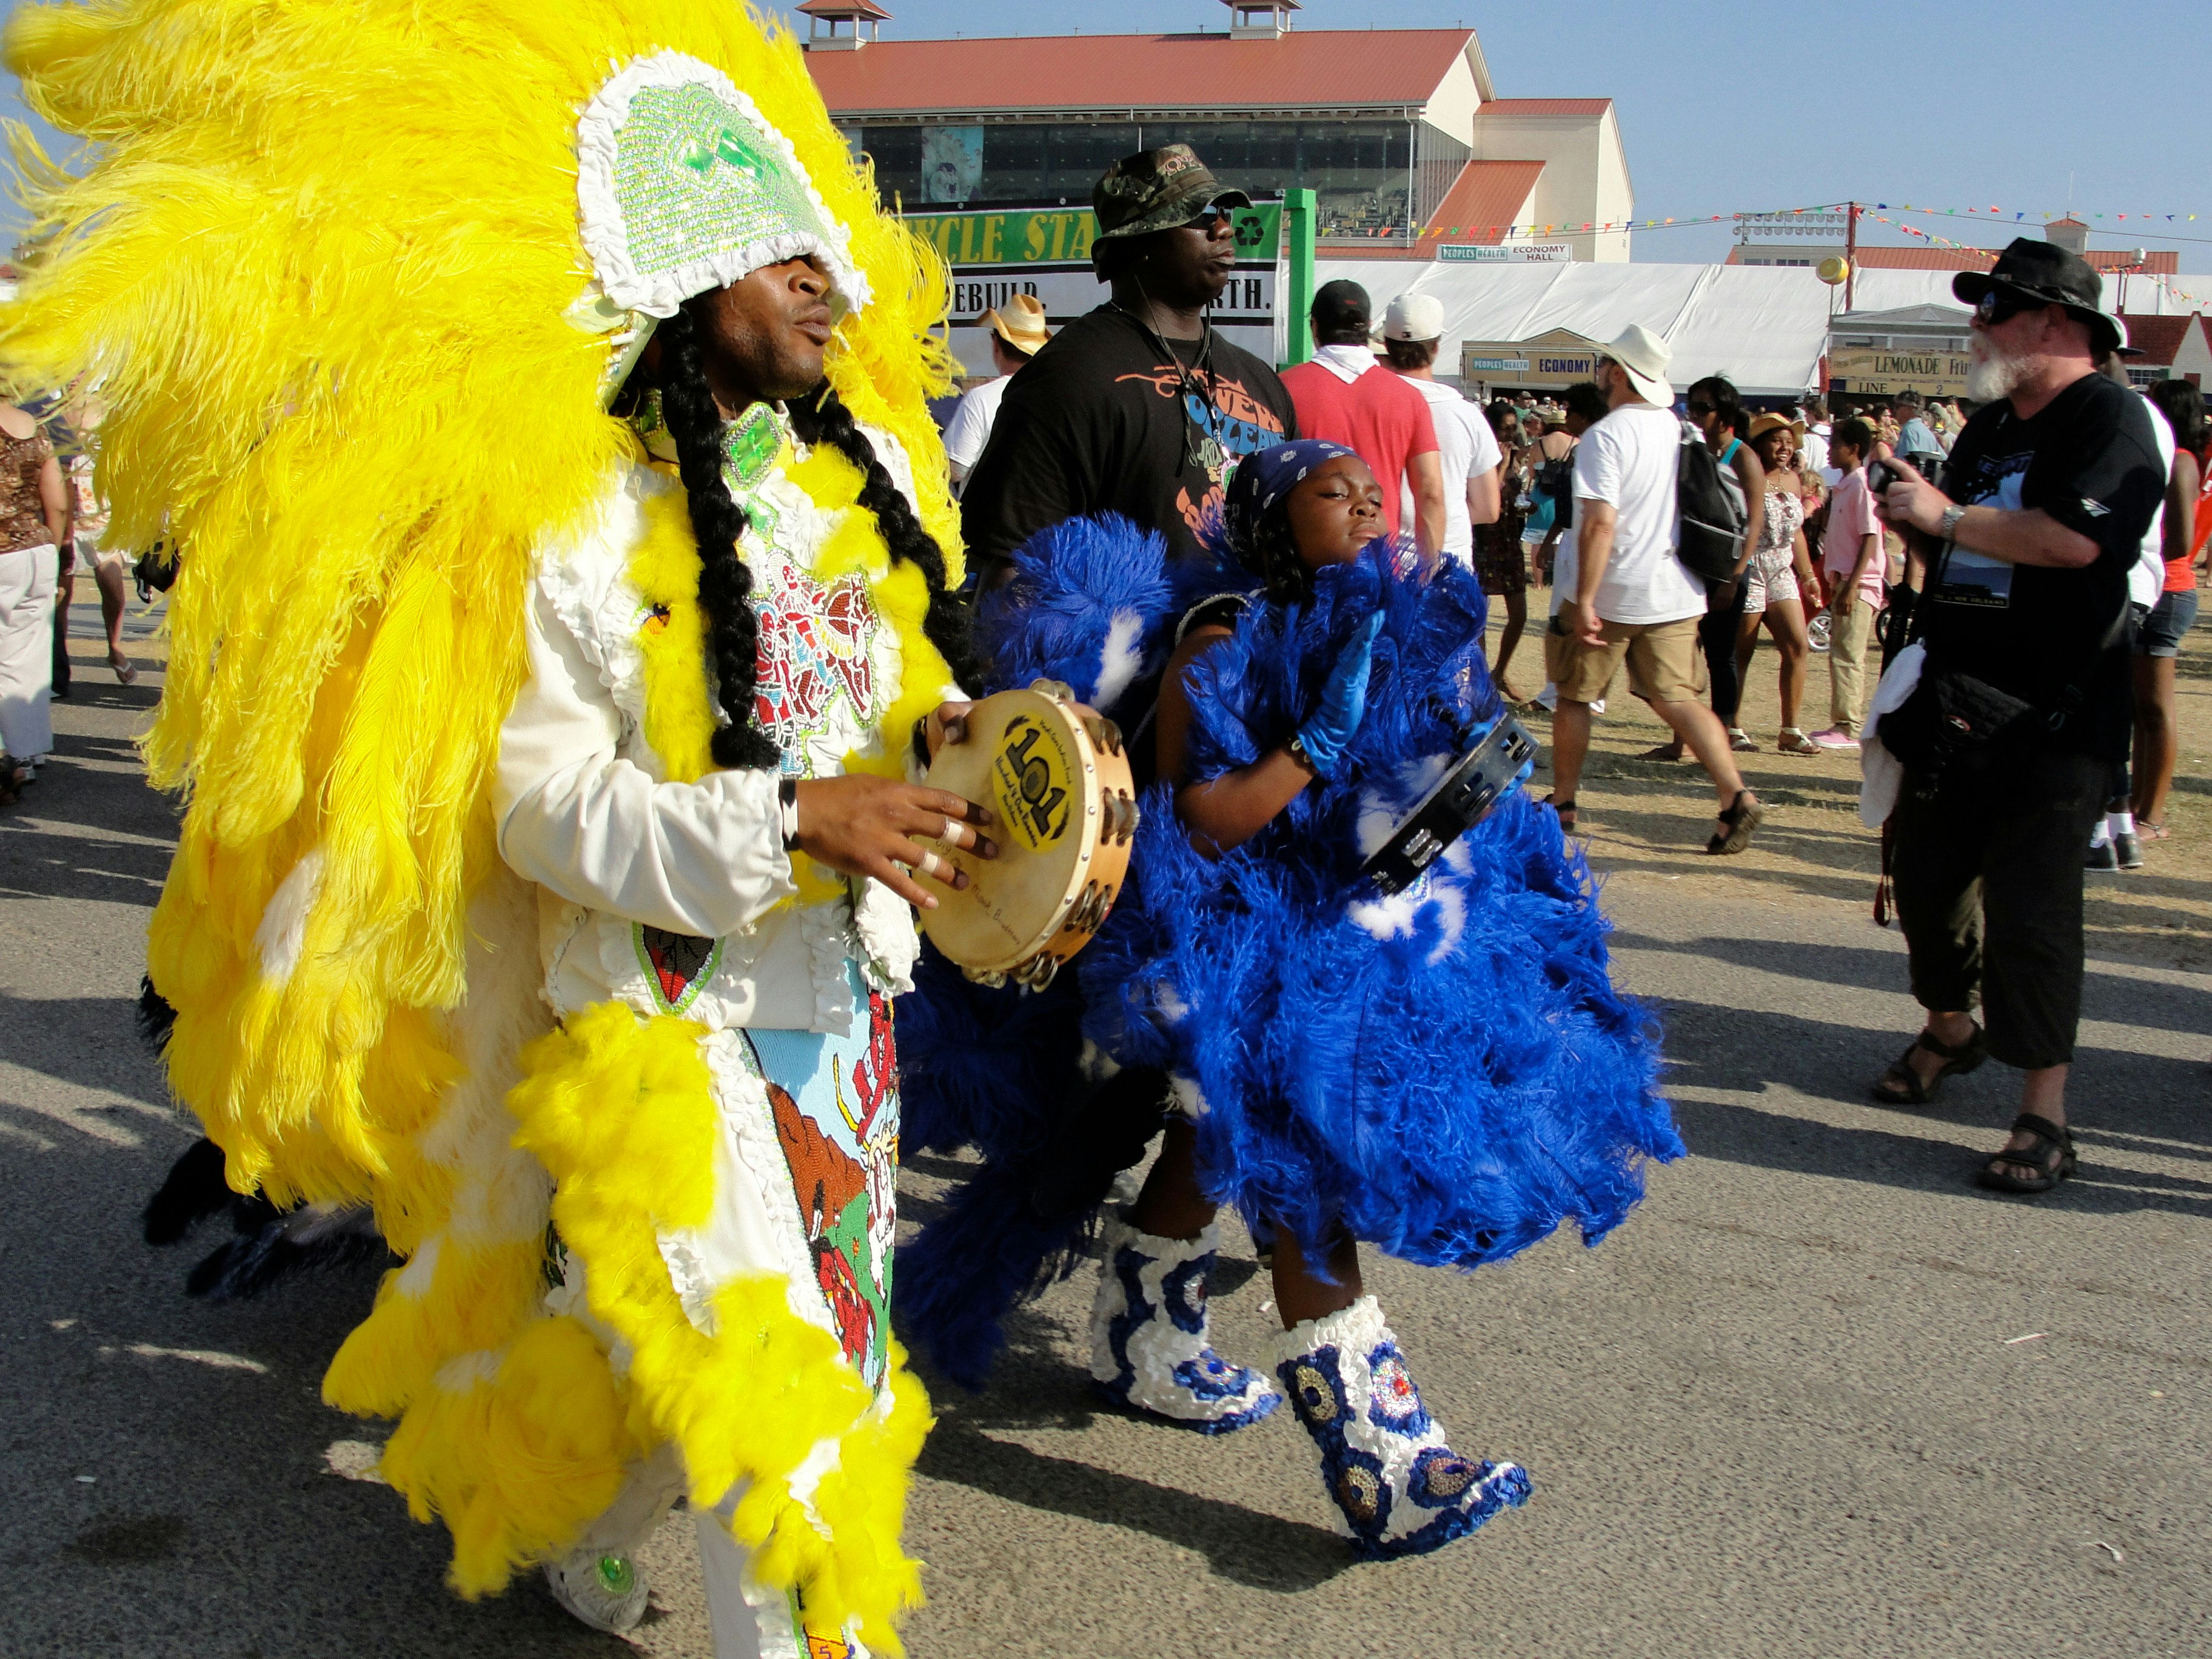 A man wearing a feathered head dress walks down a street carrying a tambourine